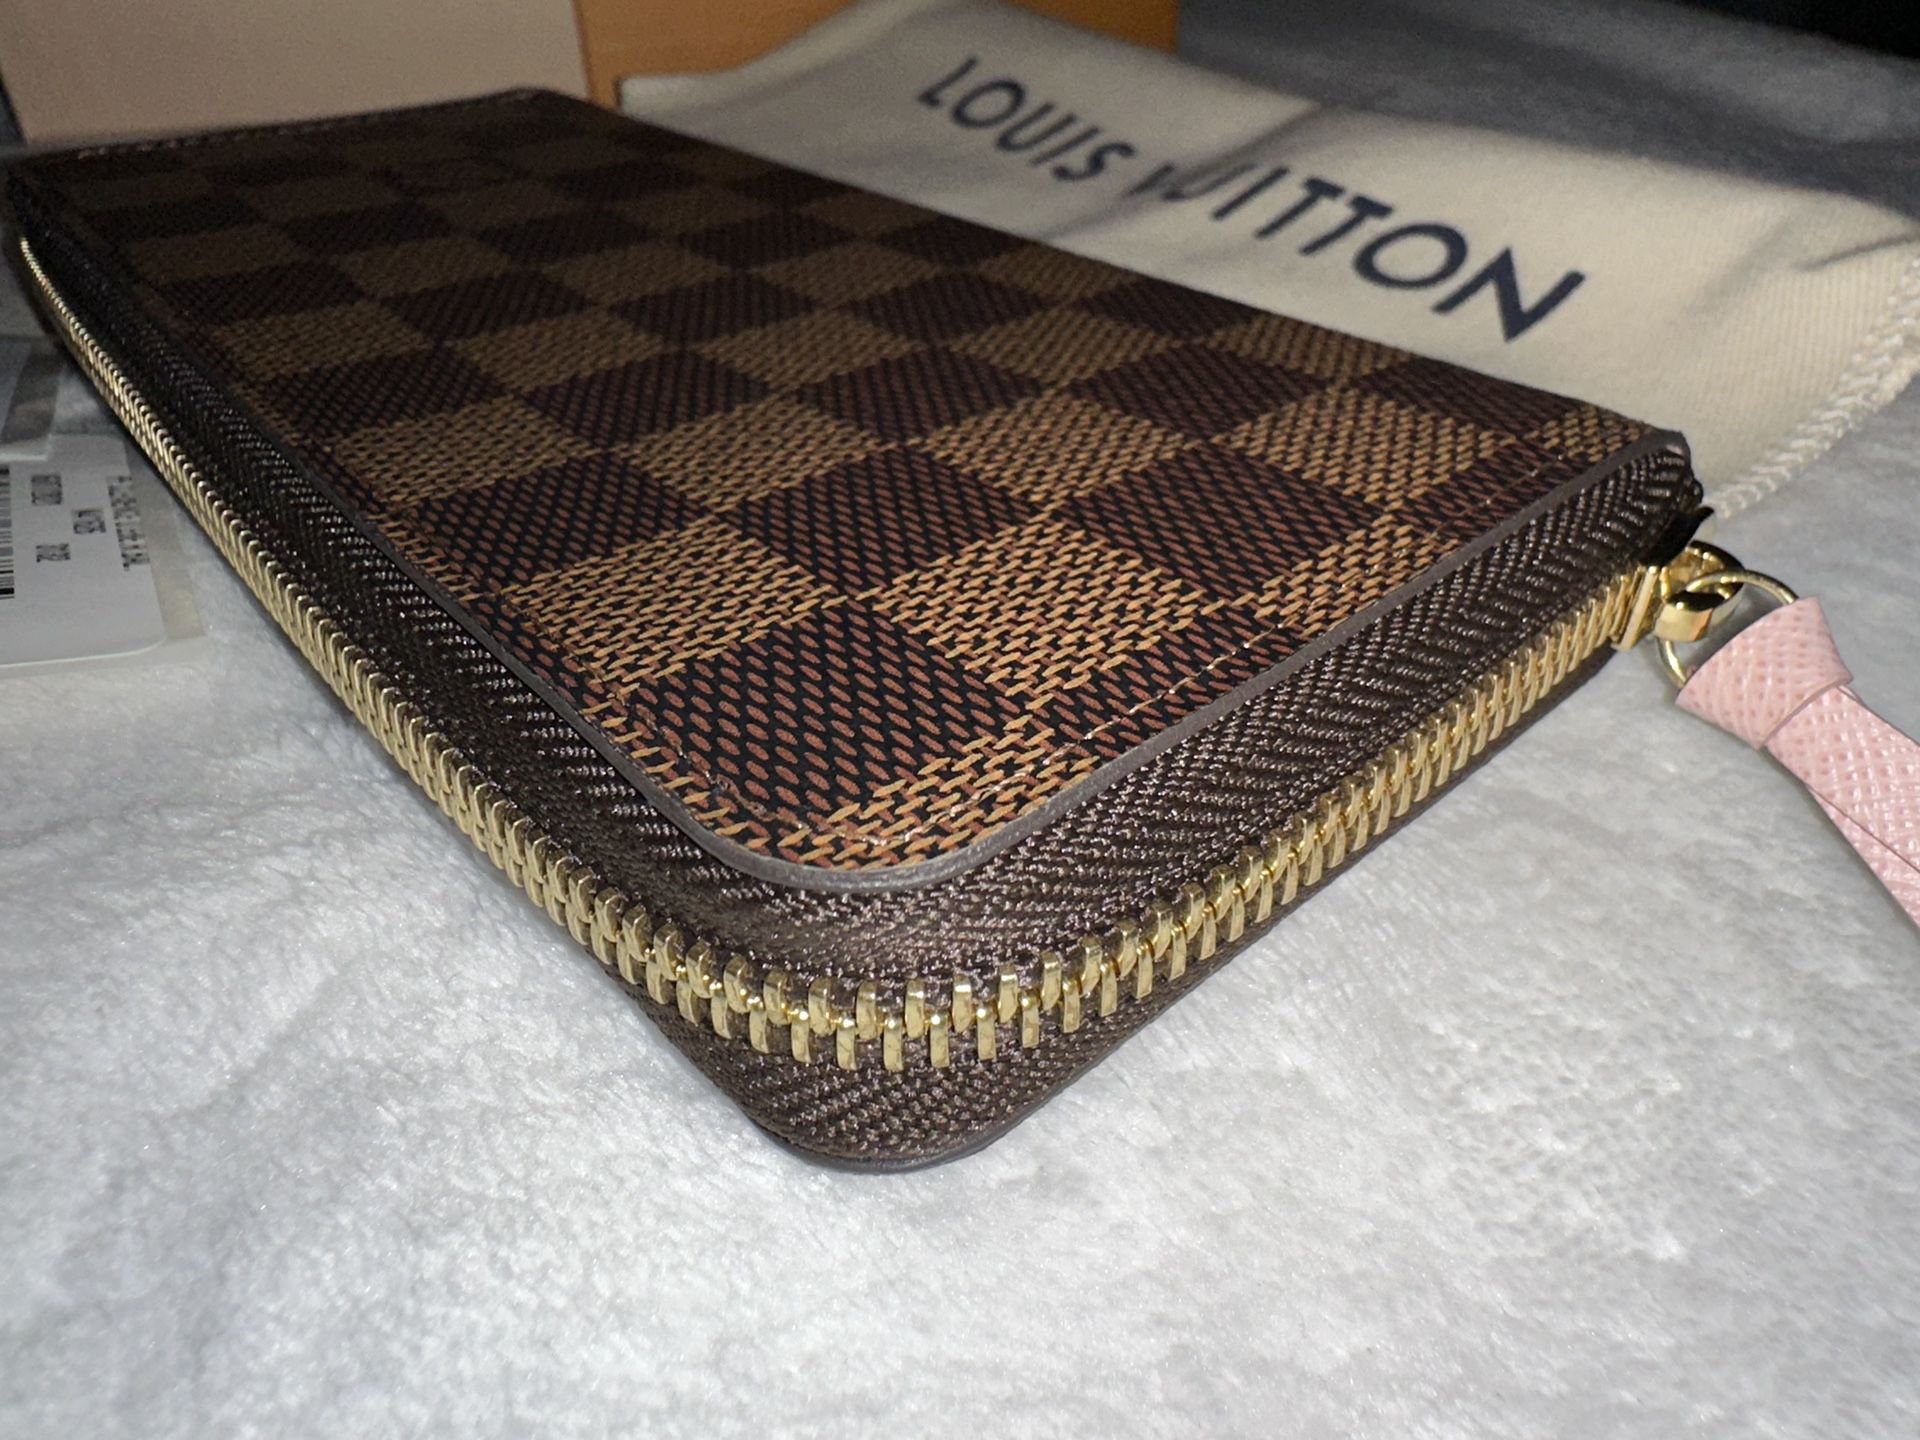 Louis Vuitton Clemence Wallet for Sale in Oakland, CA - OfferUp